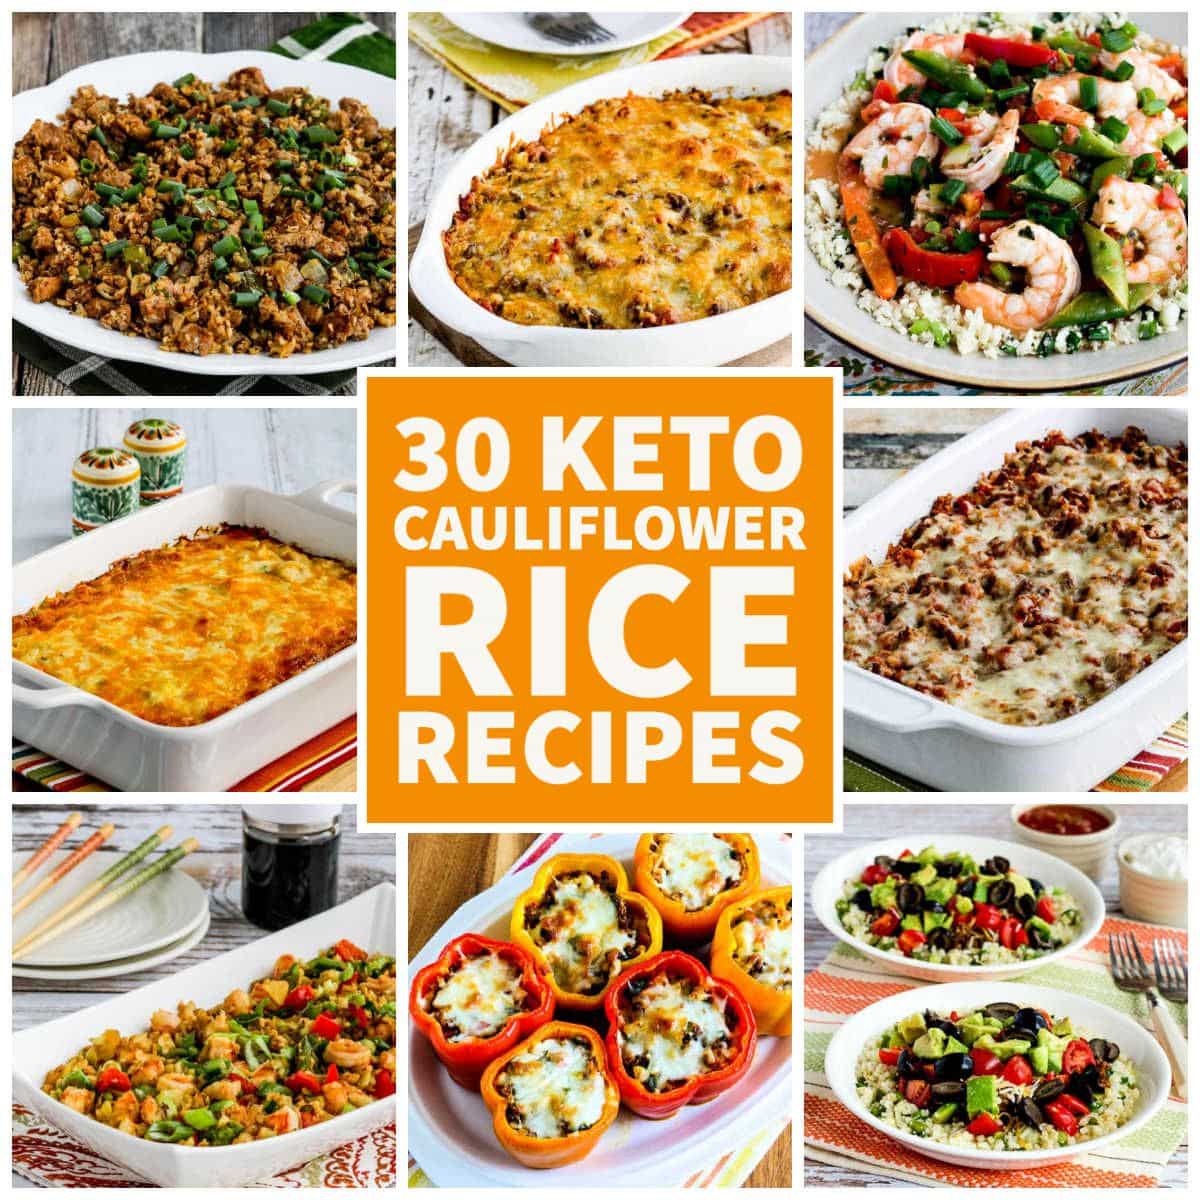 30 Keto Cauliflower Rice Recipes collage of featured recipes